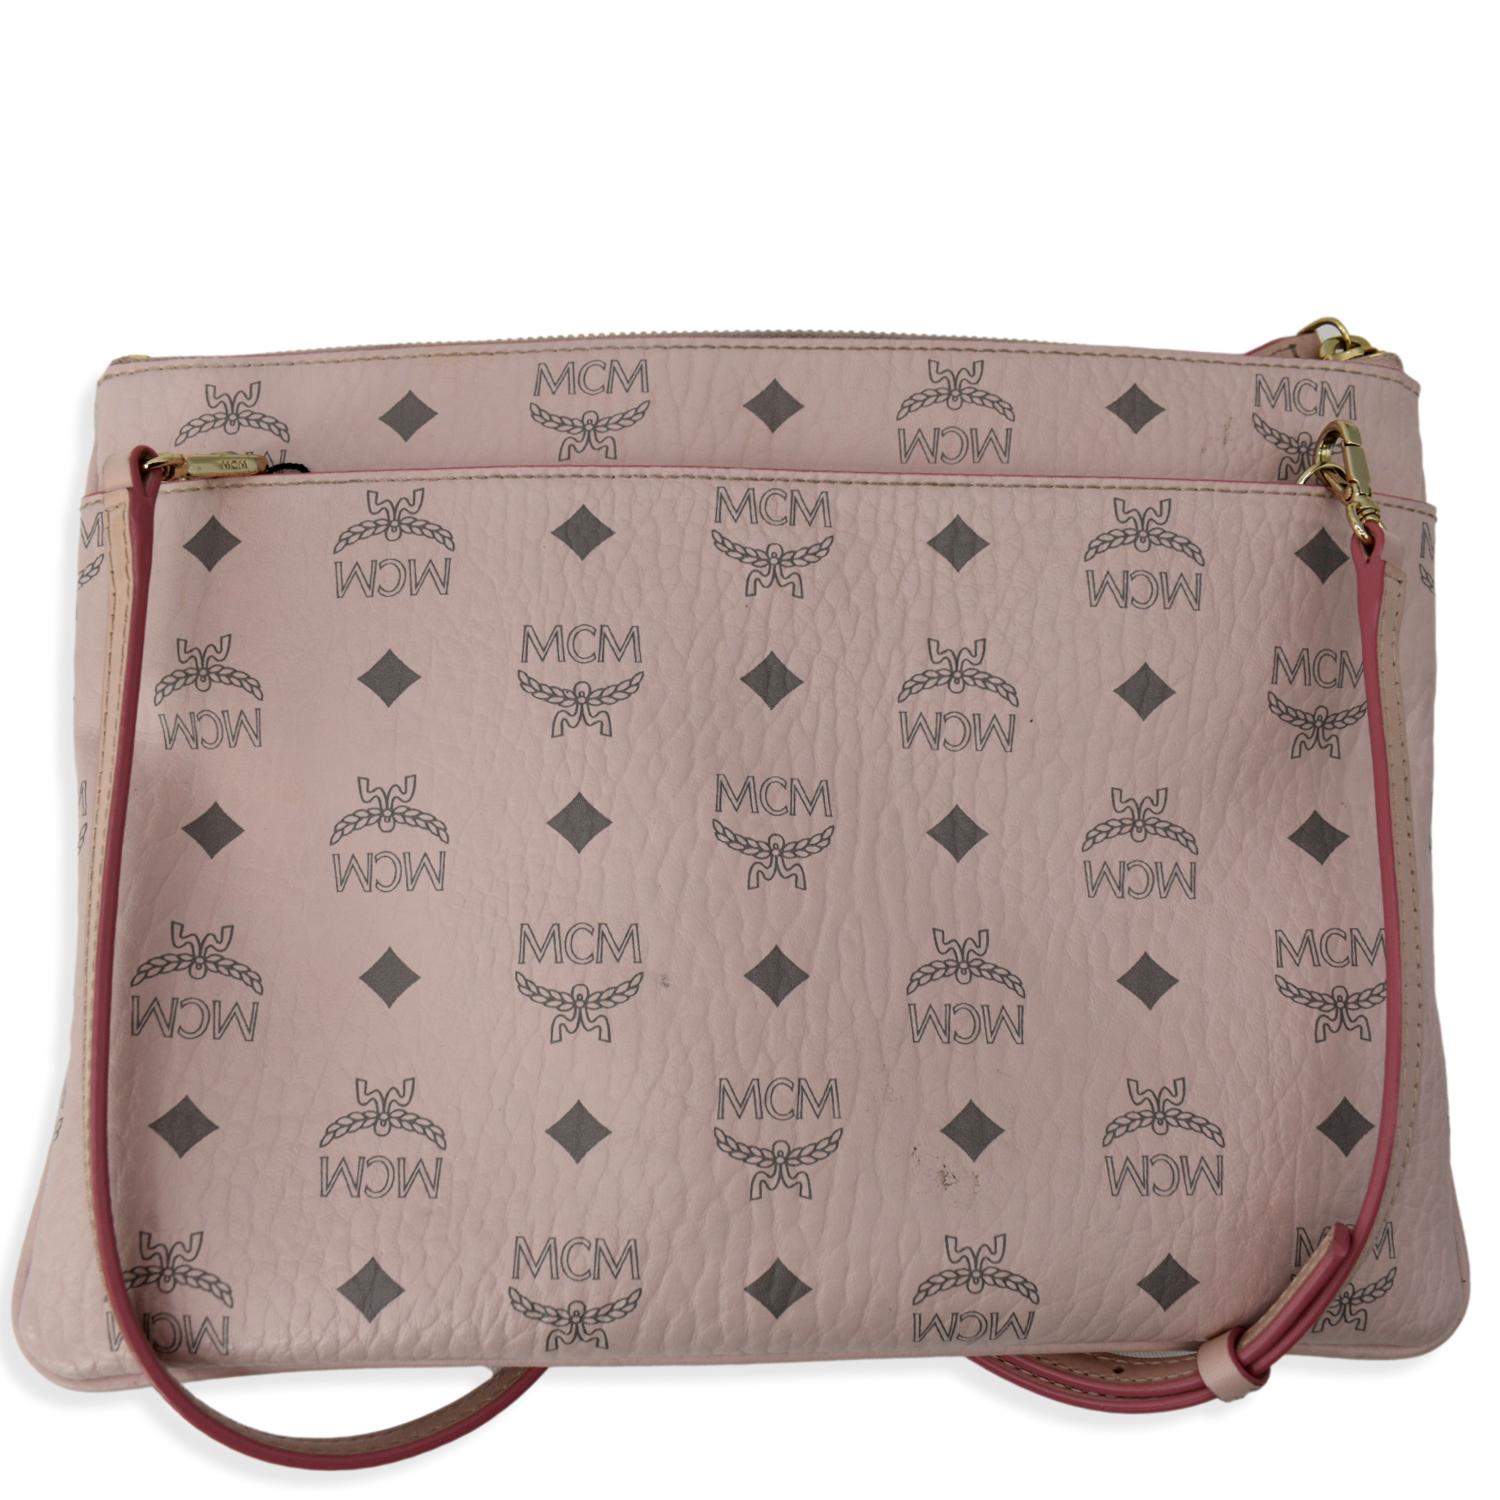 MCM Visteos Pouch Purse Pink Leather Cross Body Bag/Pouch for